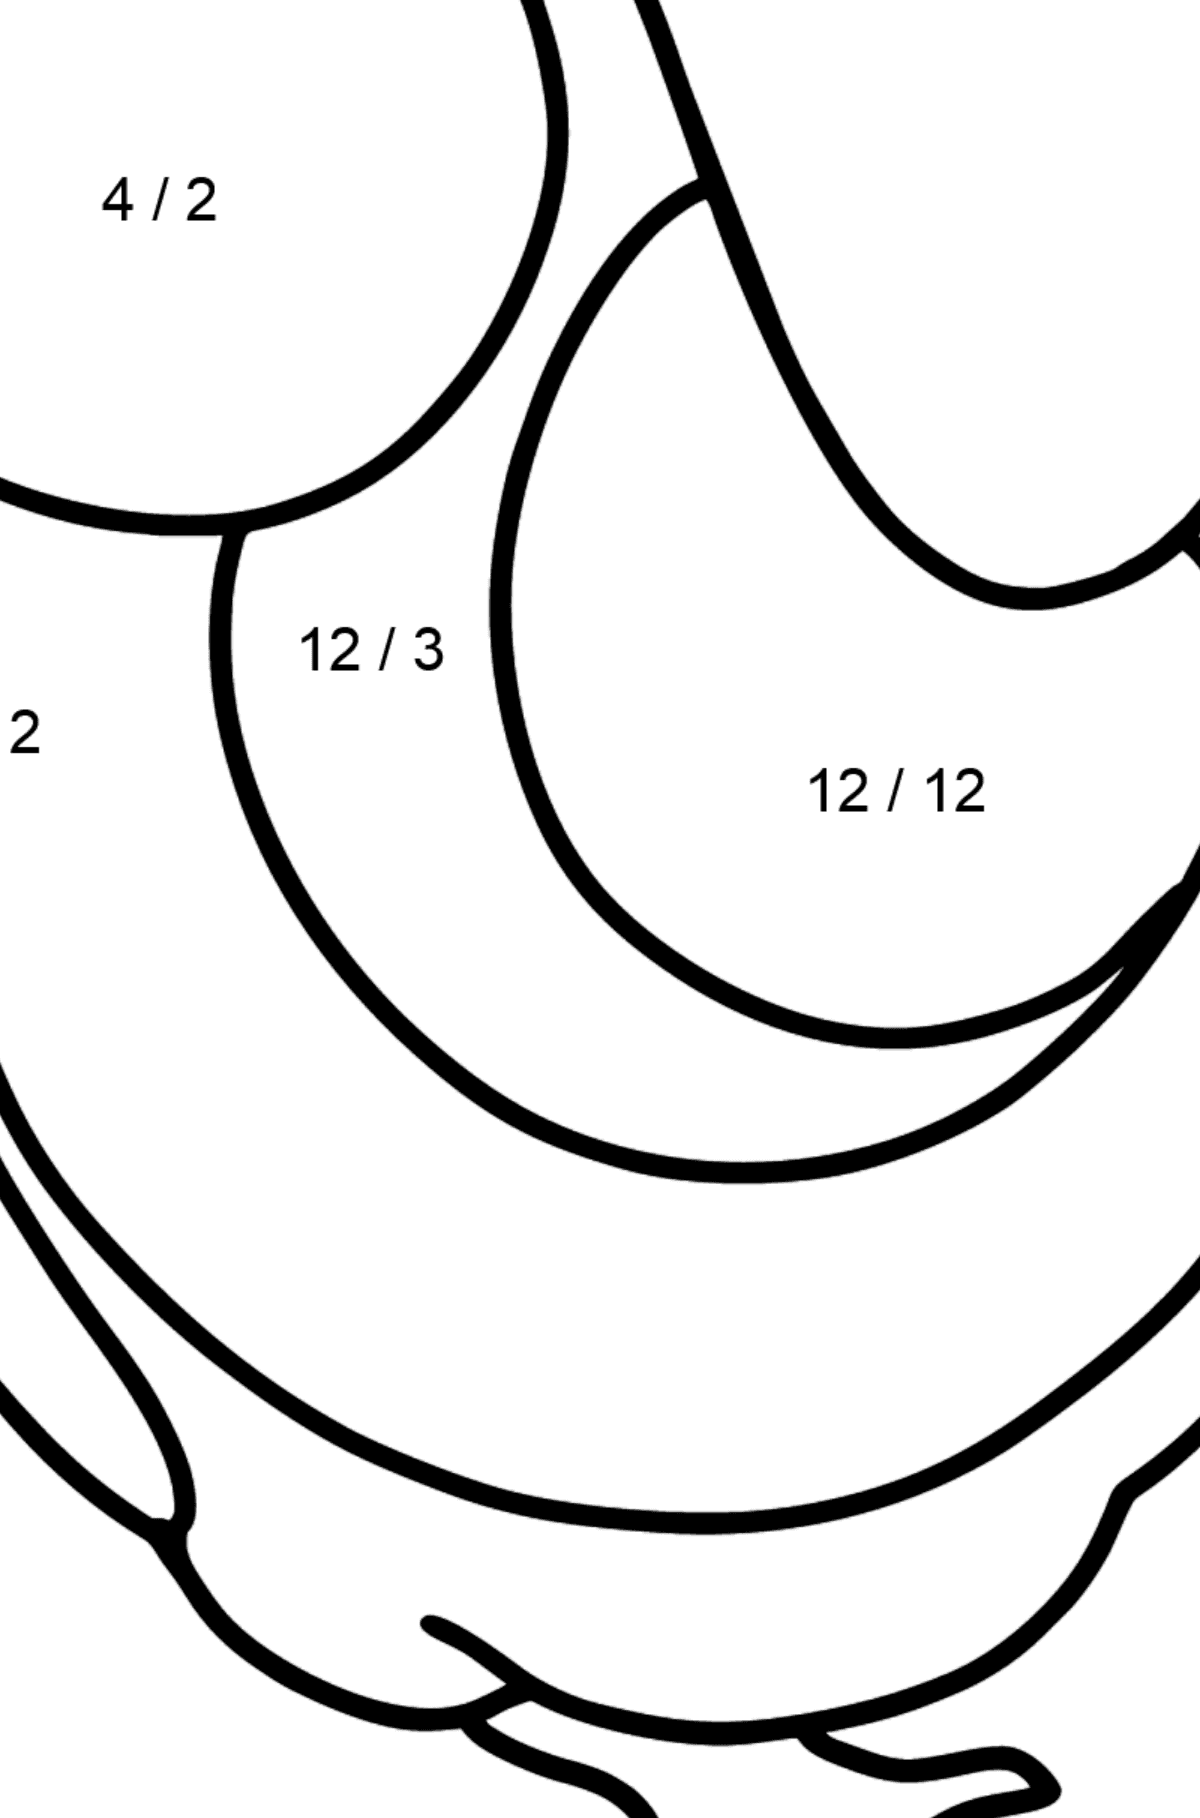 Simple coloring page with a Tit - Math Coloring - Division for Kids